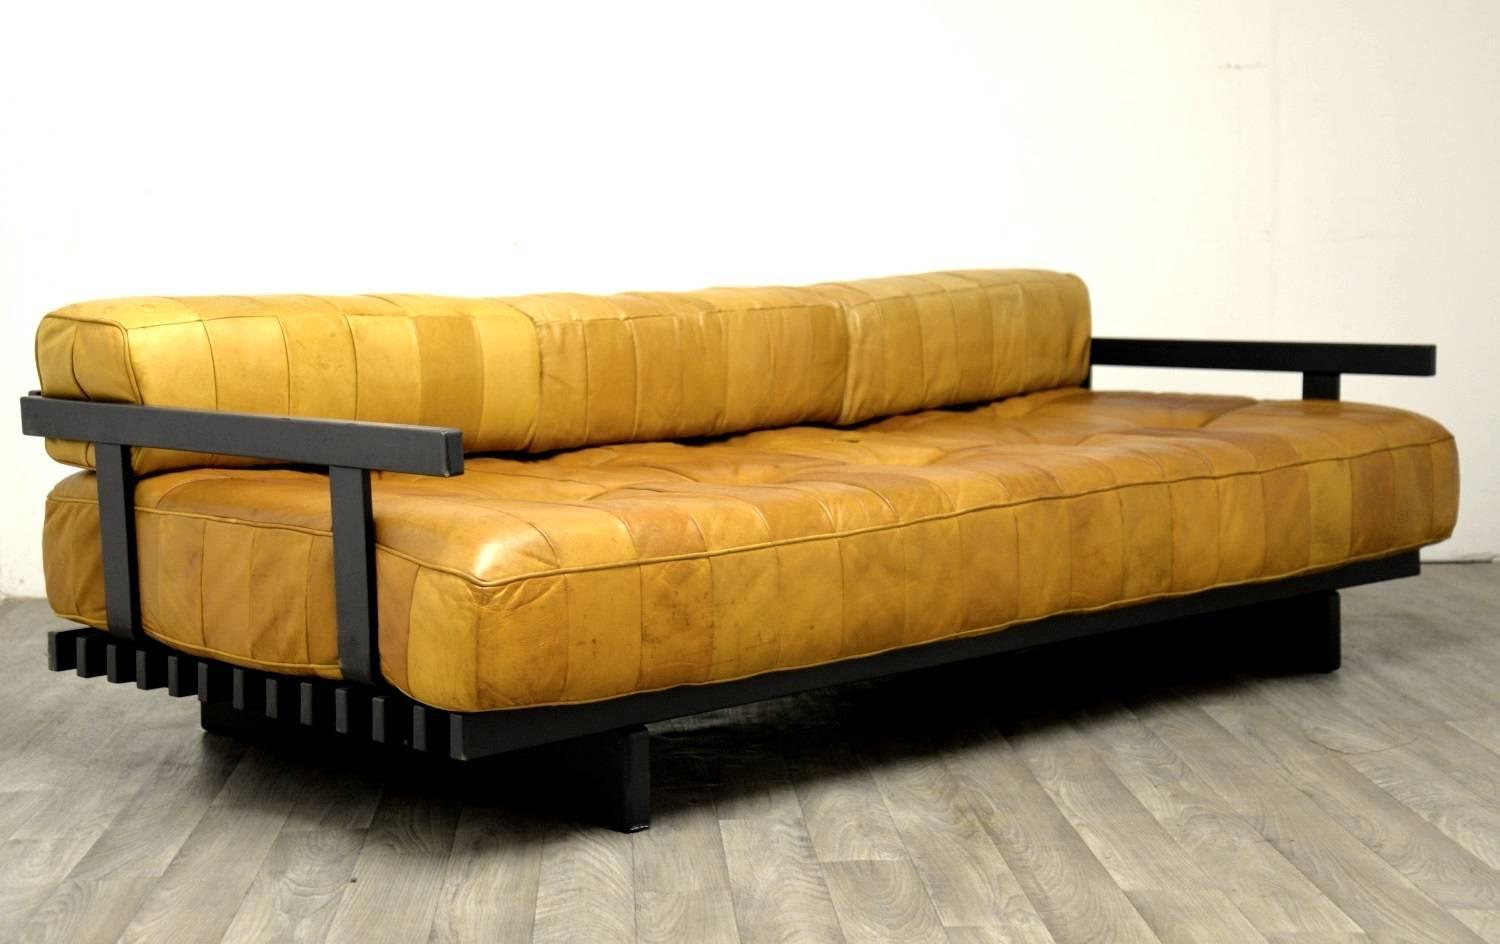 Mid-20th Century Vintage Swiss de Sede Ds 80 Leather Daybed, 1960s